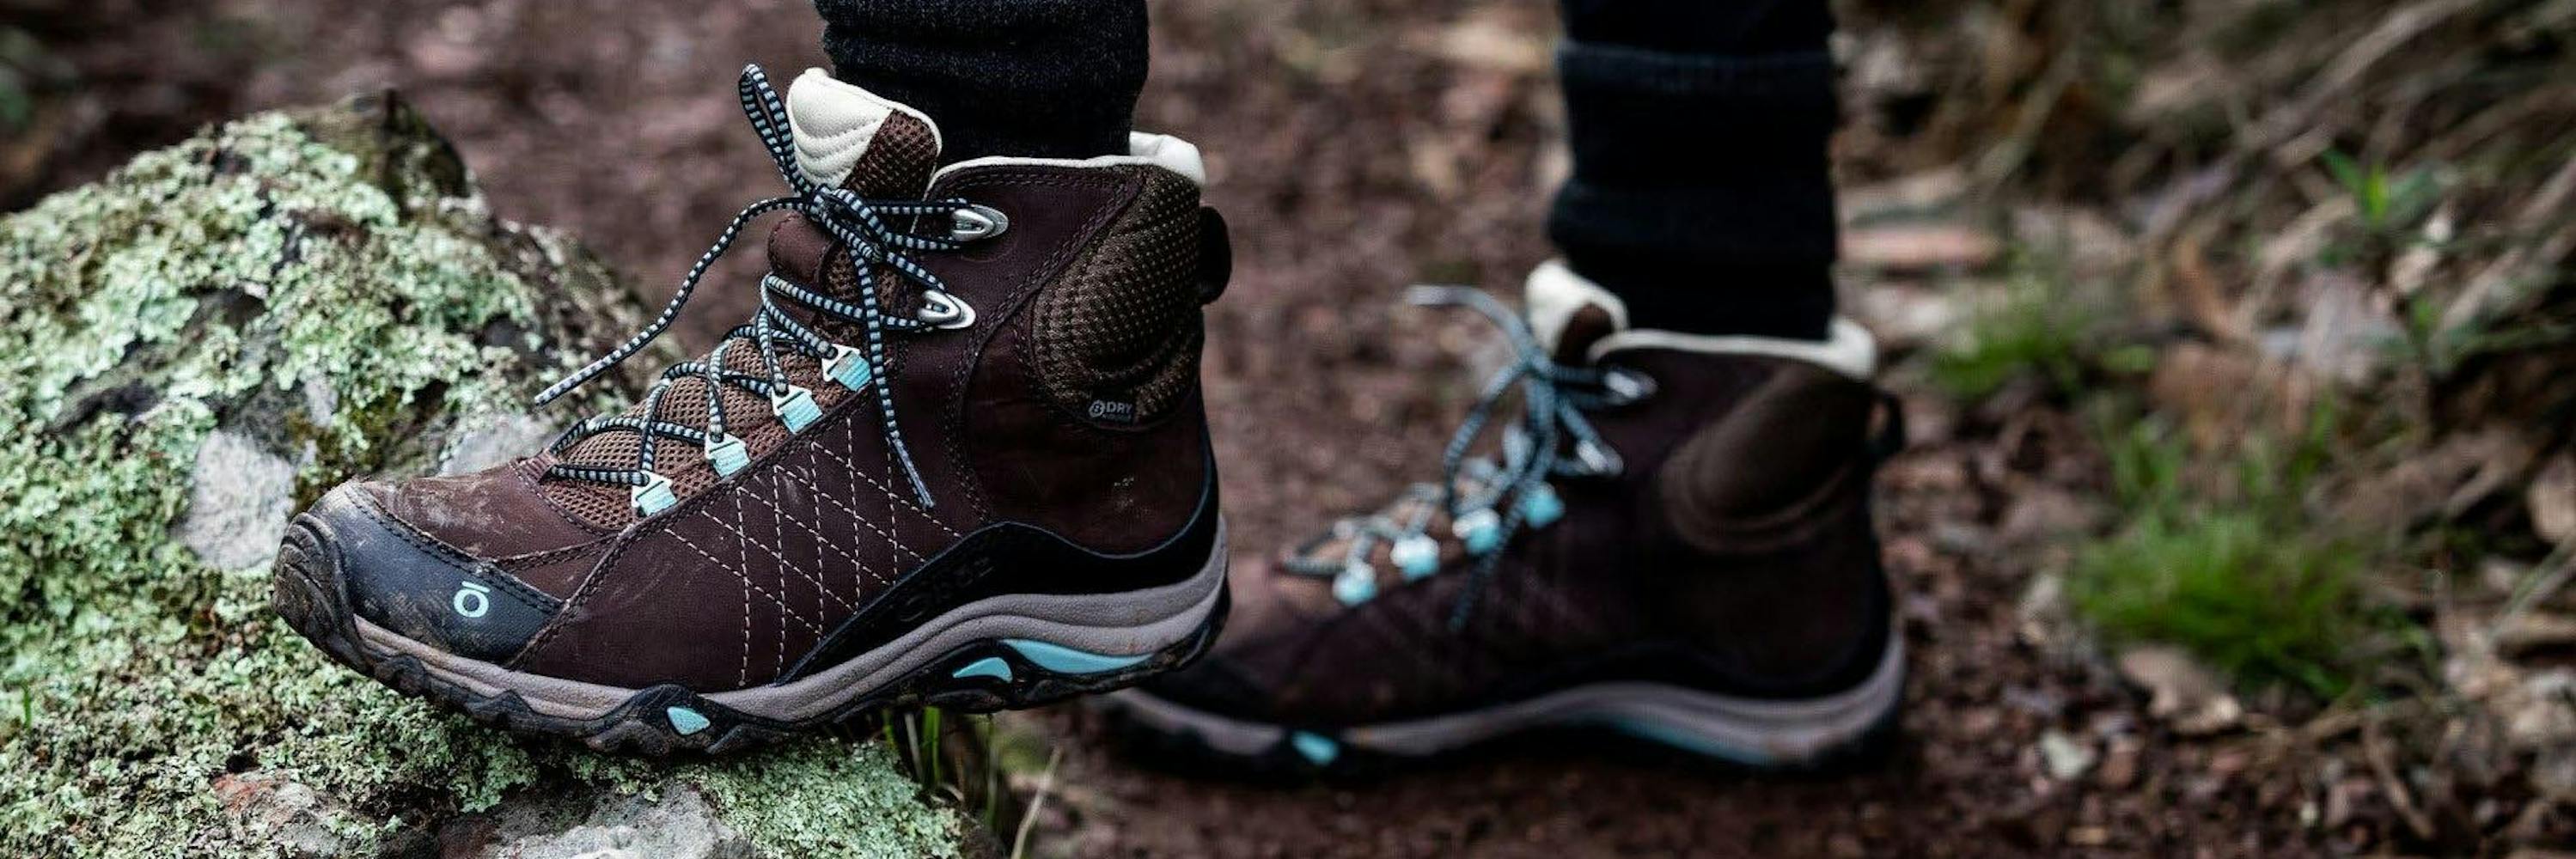 How to Choose the Right Hiking Boots & Trail Shoes | Kathmandu Blog